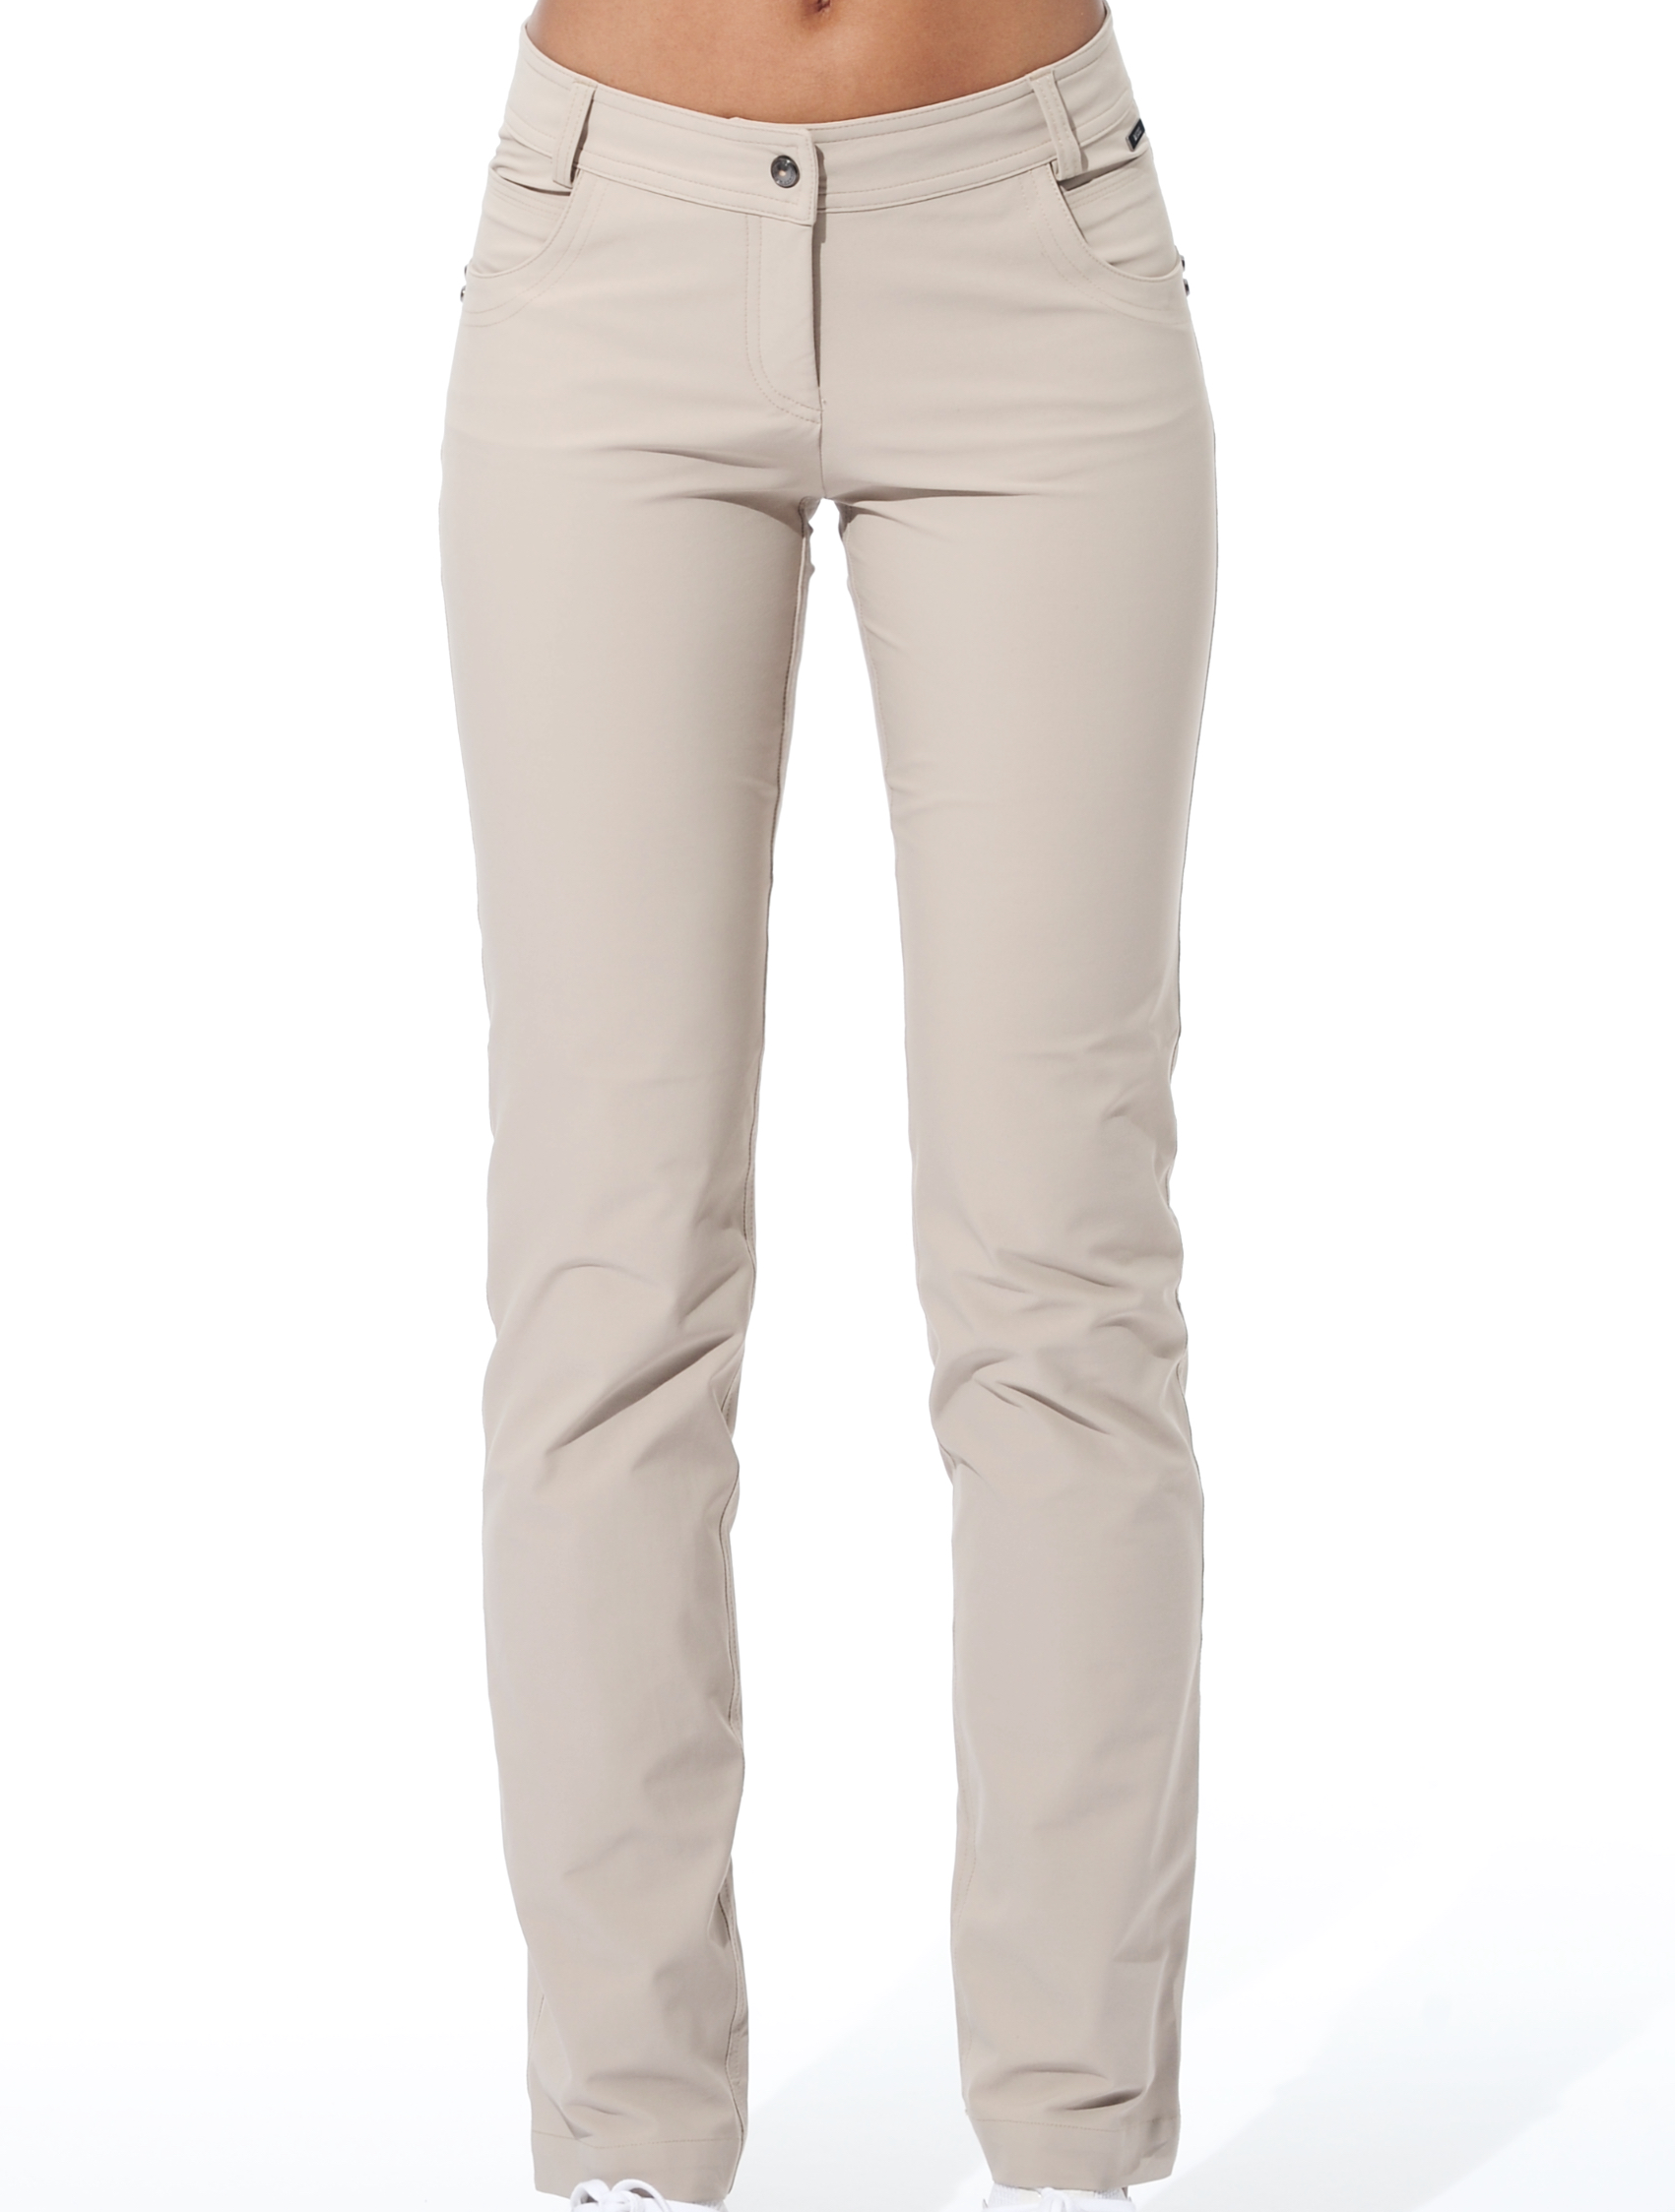 4way stretch straight cut pants light taupe 